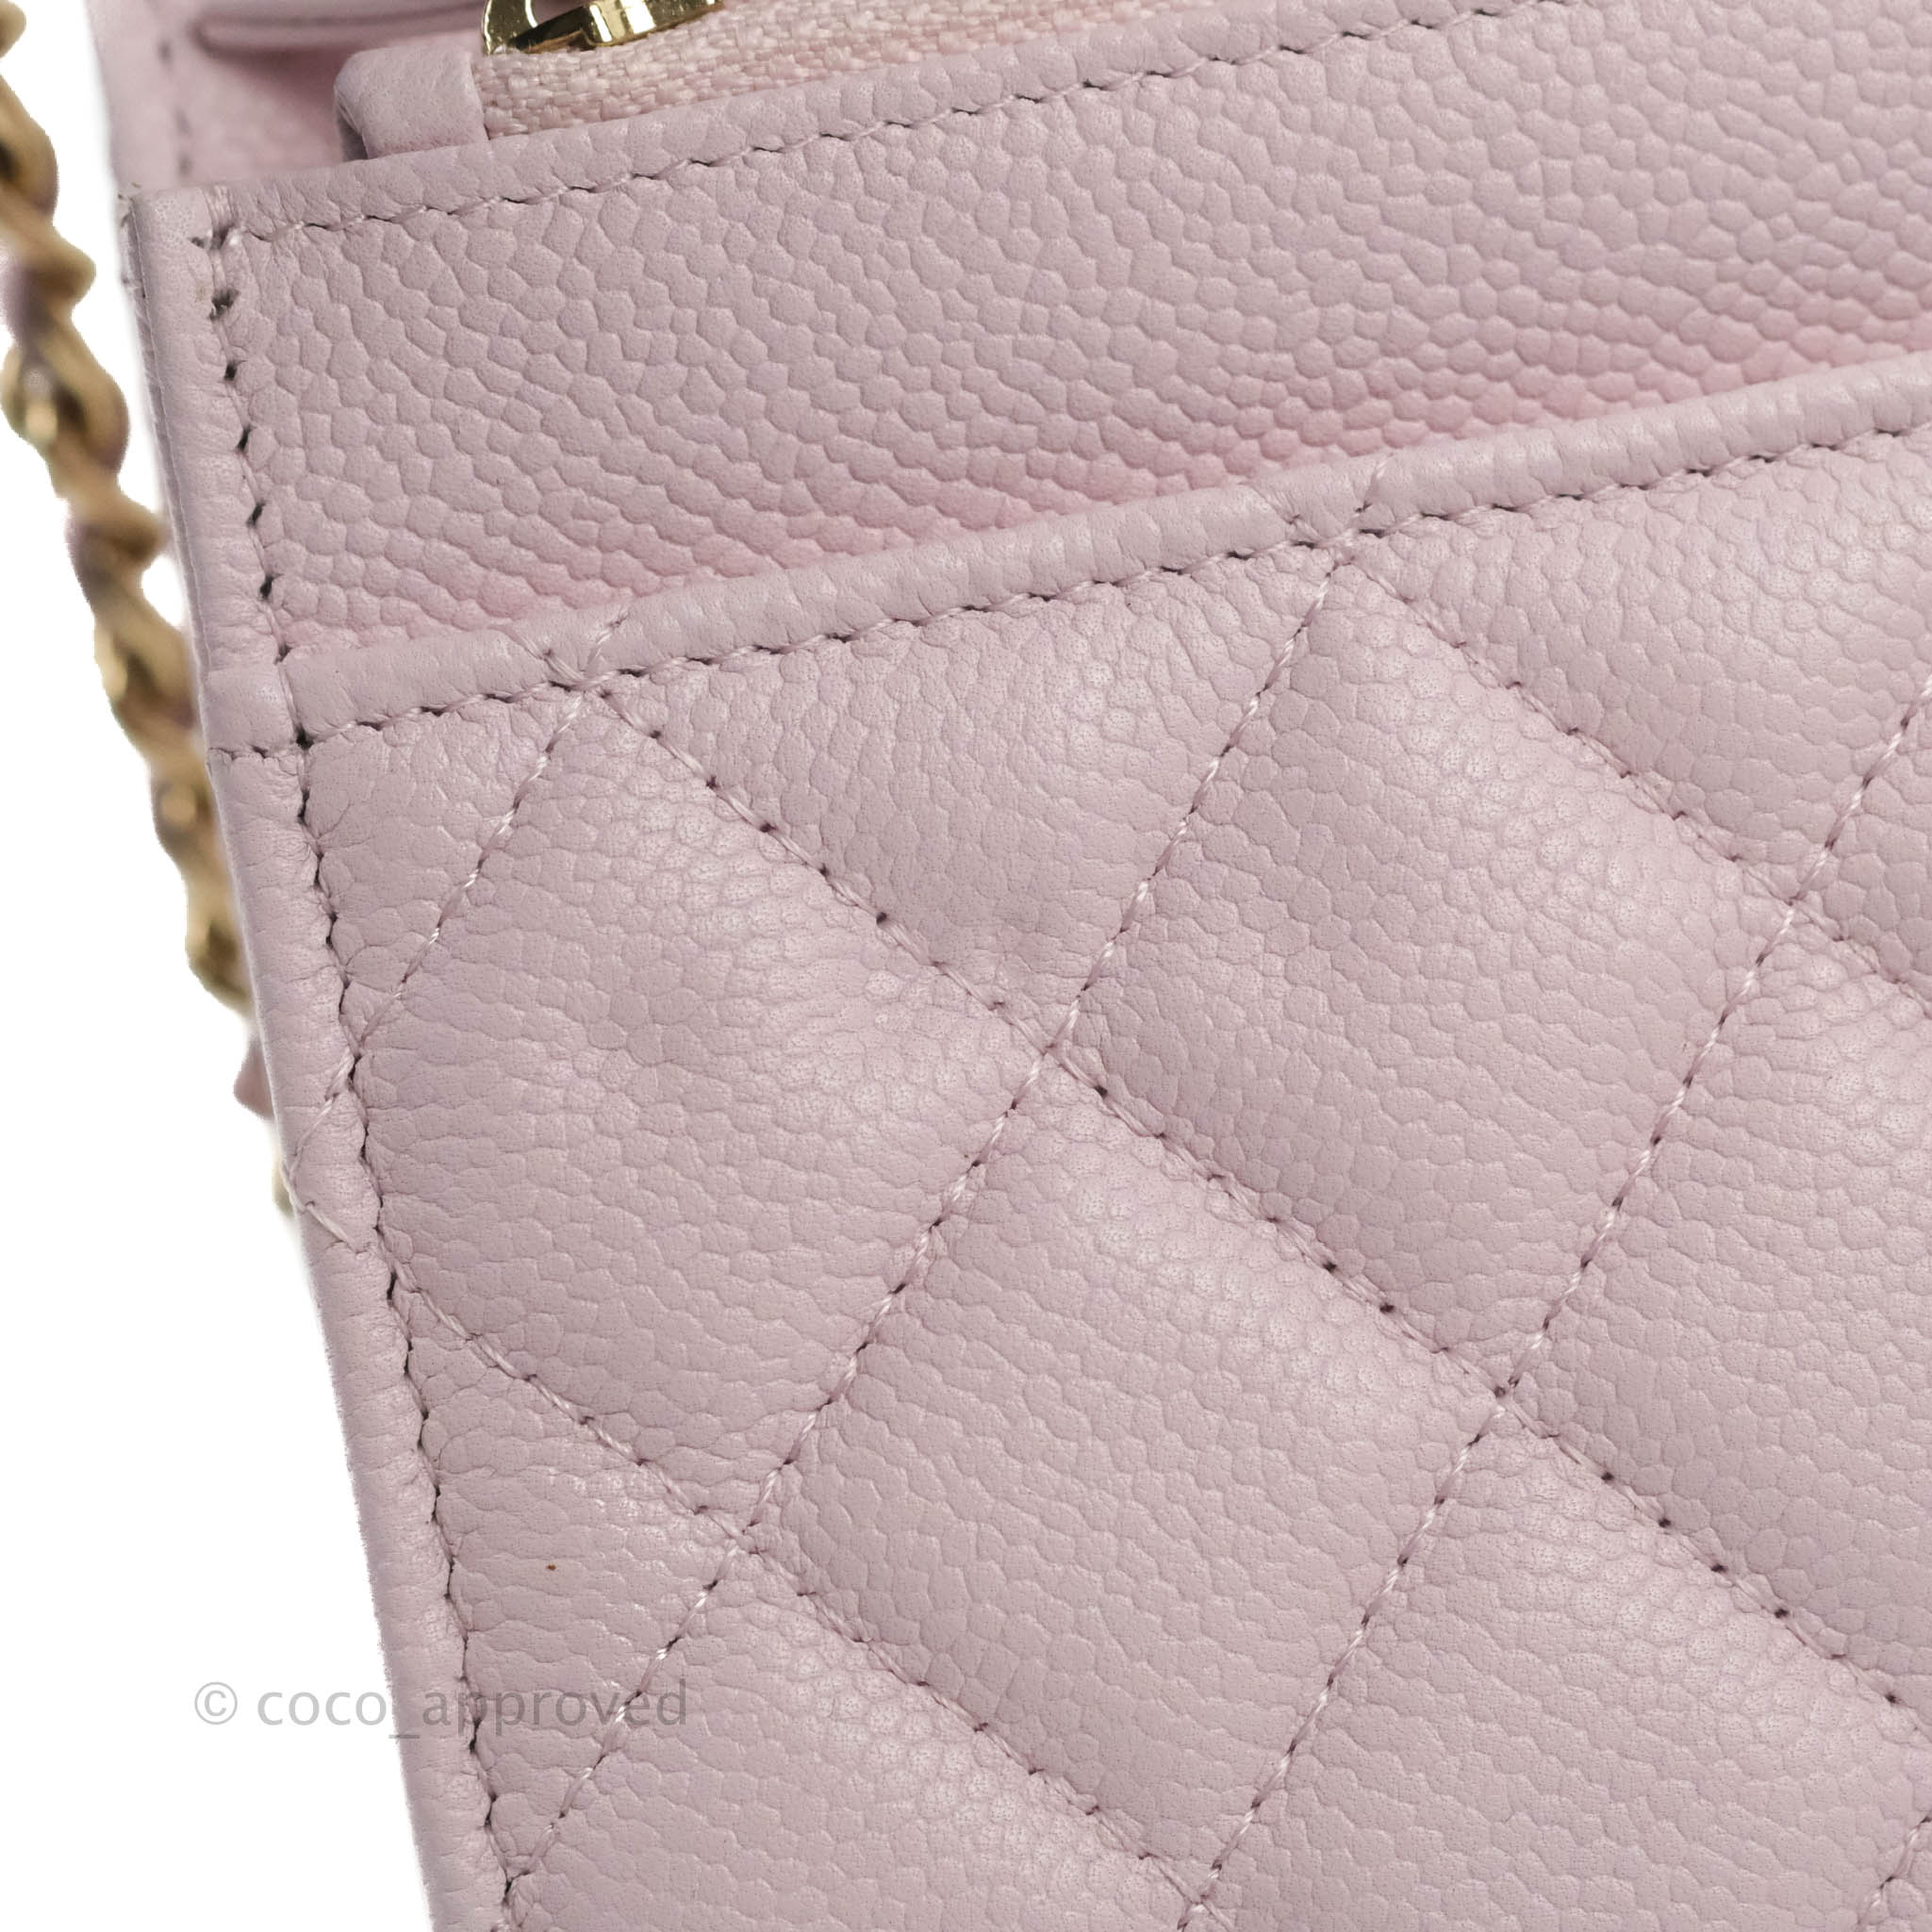 Chanel Classic Wallet on Chain, 22P Light Pink Caviar Leather, Gold  Hardware, New in Box MA001